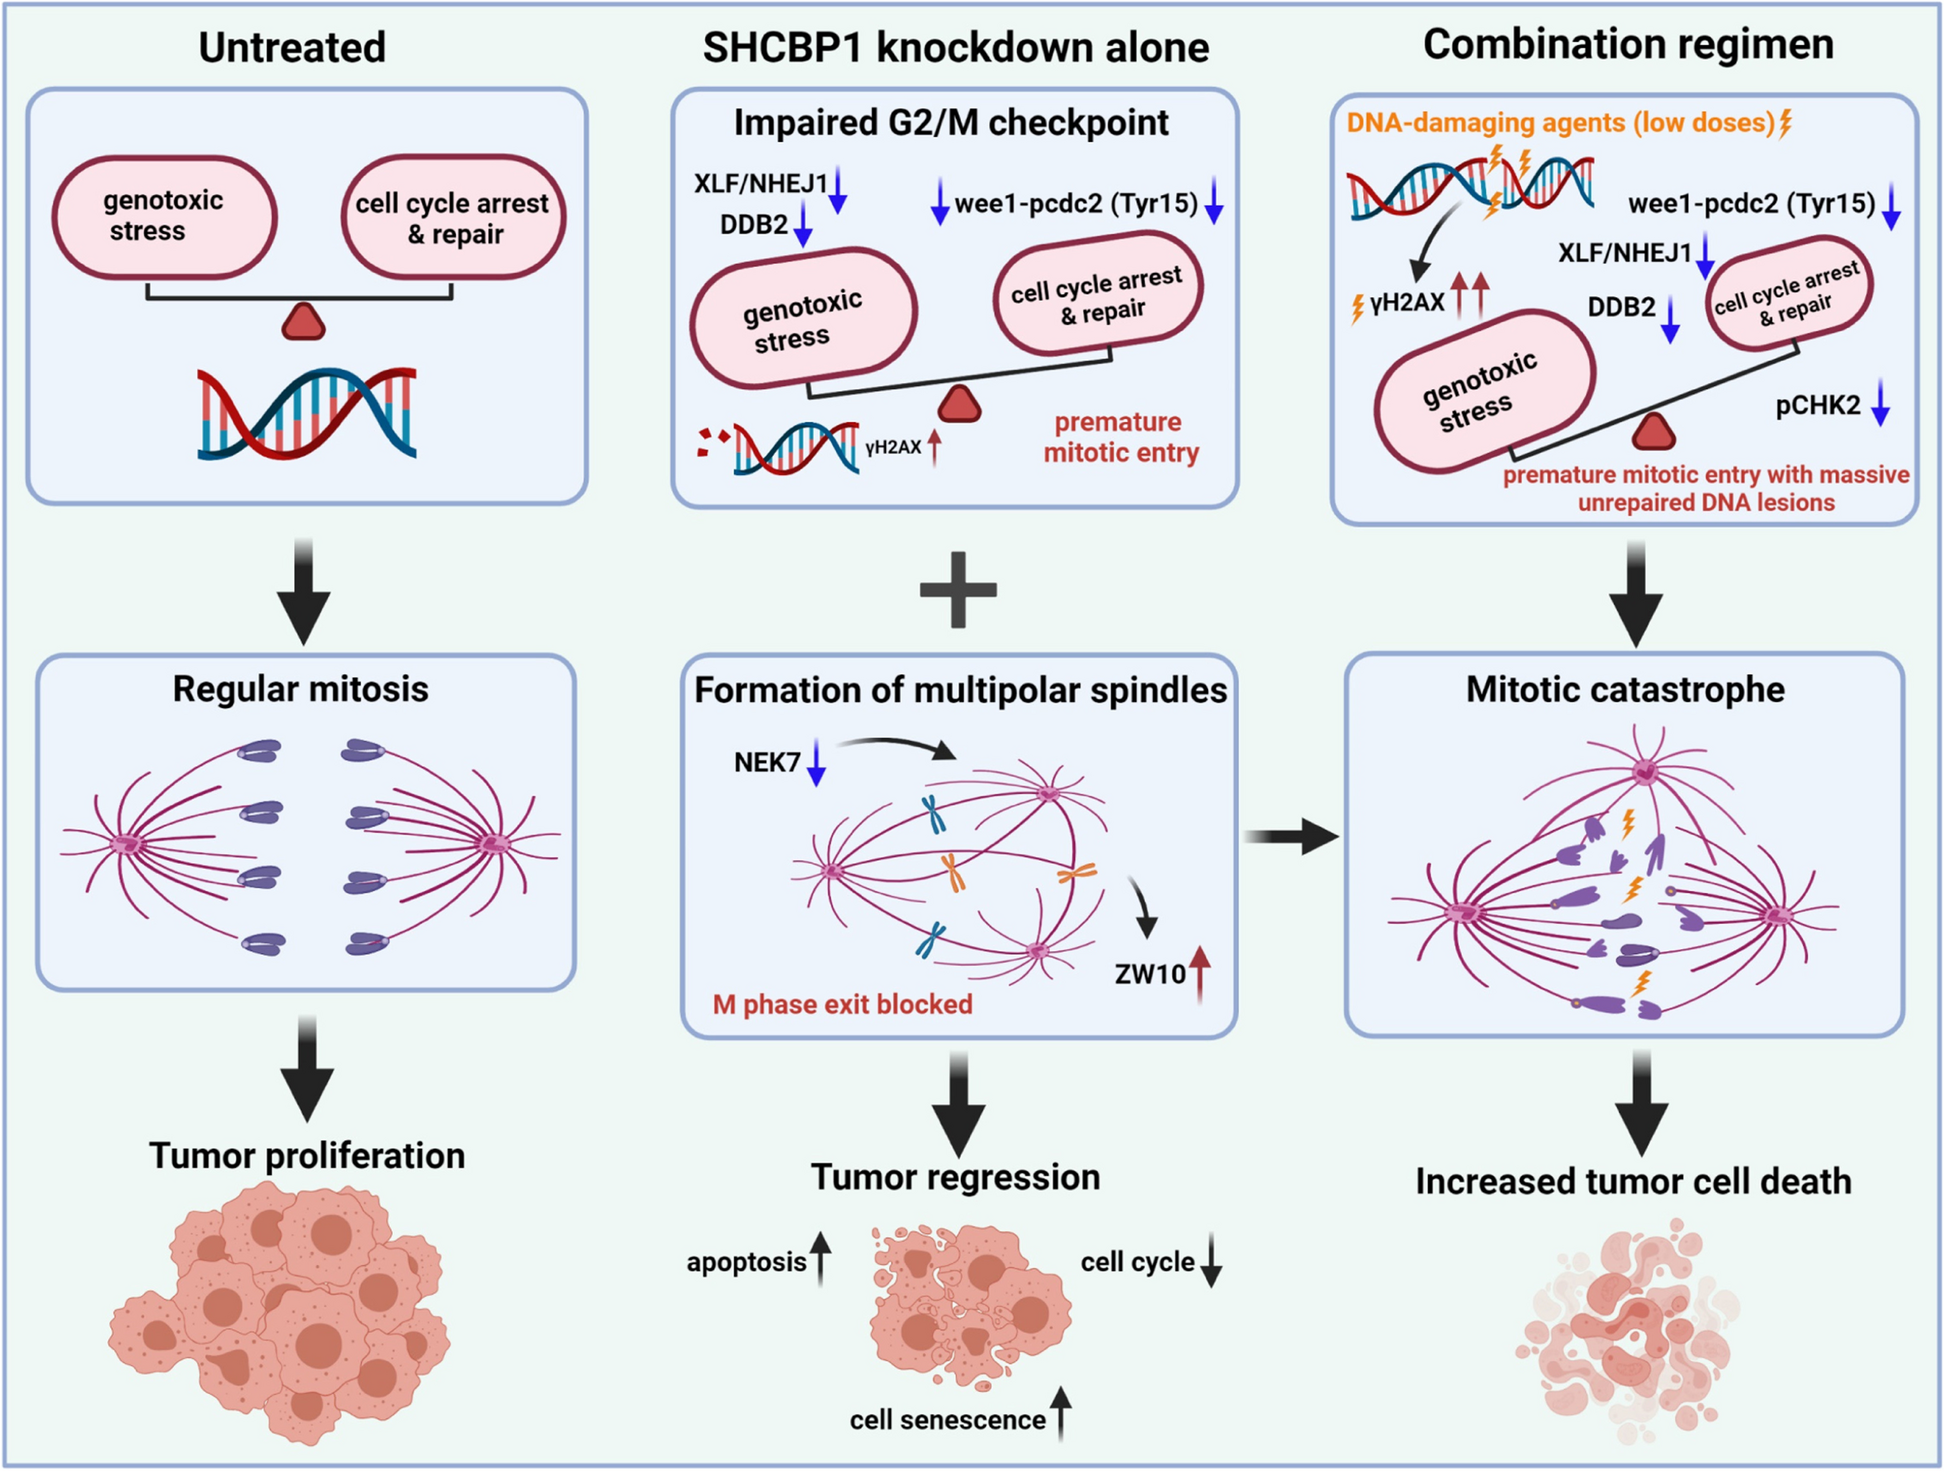 The dynamic role of nucleoprotein SHCBP1 in the cancer cell cycle and its potential as a synergistic target for DNA-damaging agents in cancer therapy